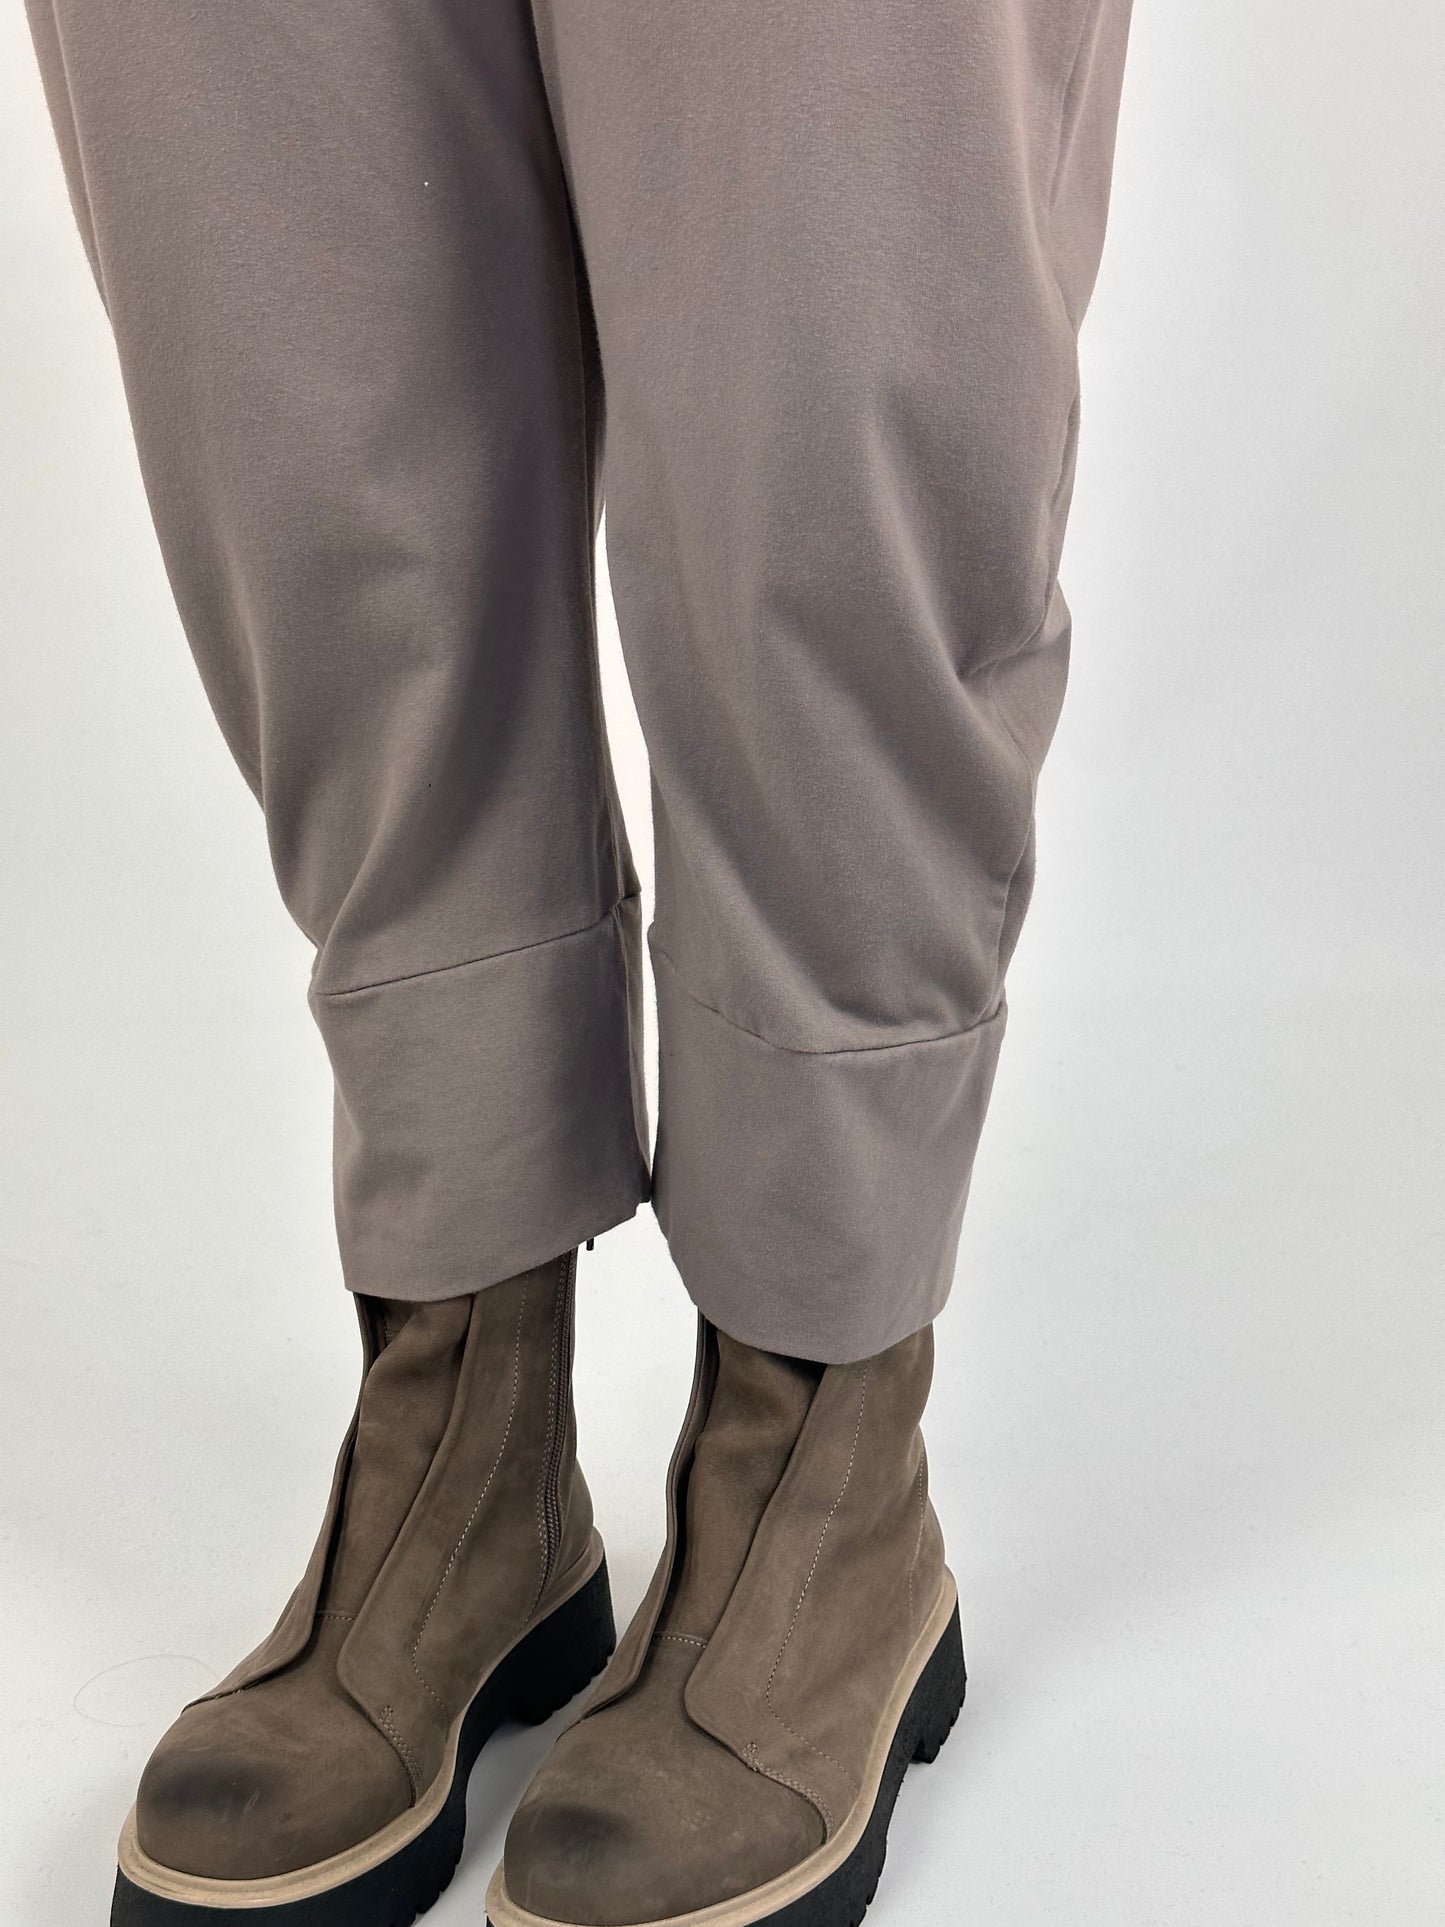 LVL Base Trousers Taupe